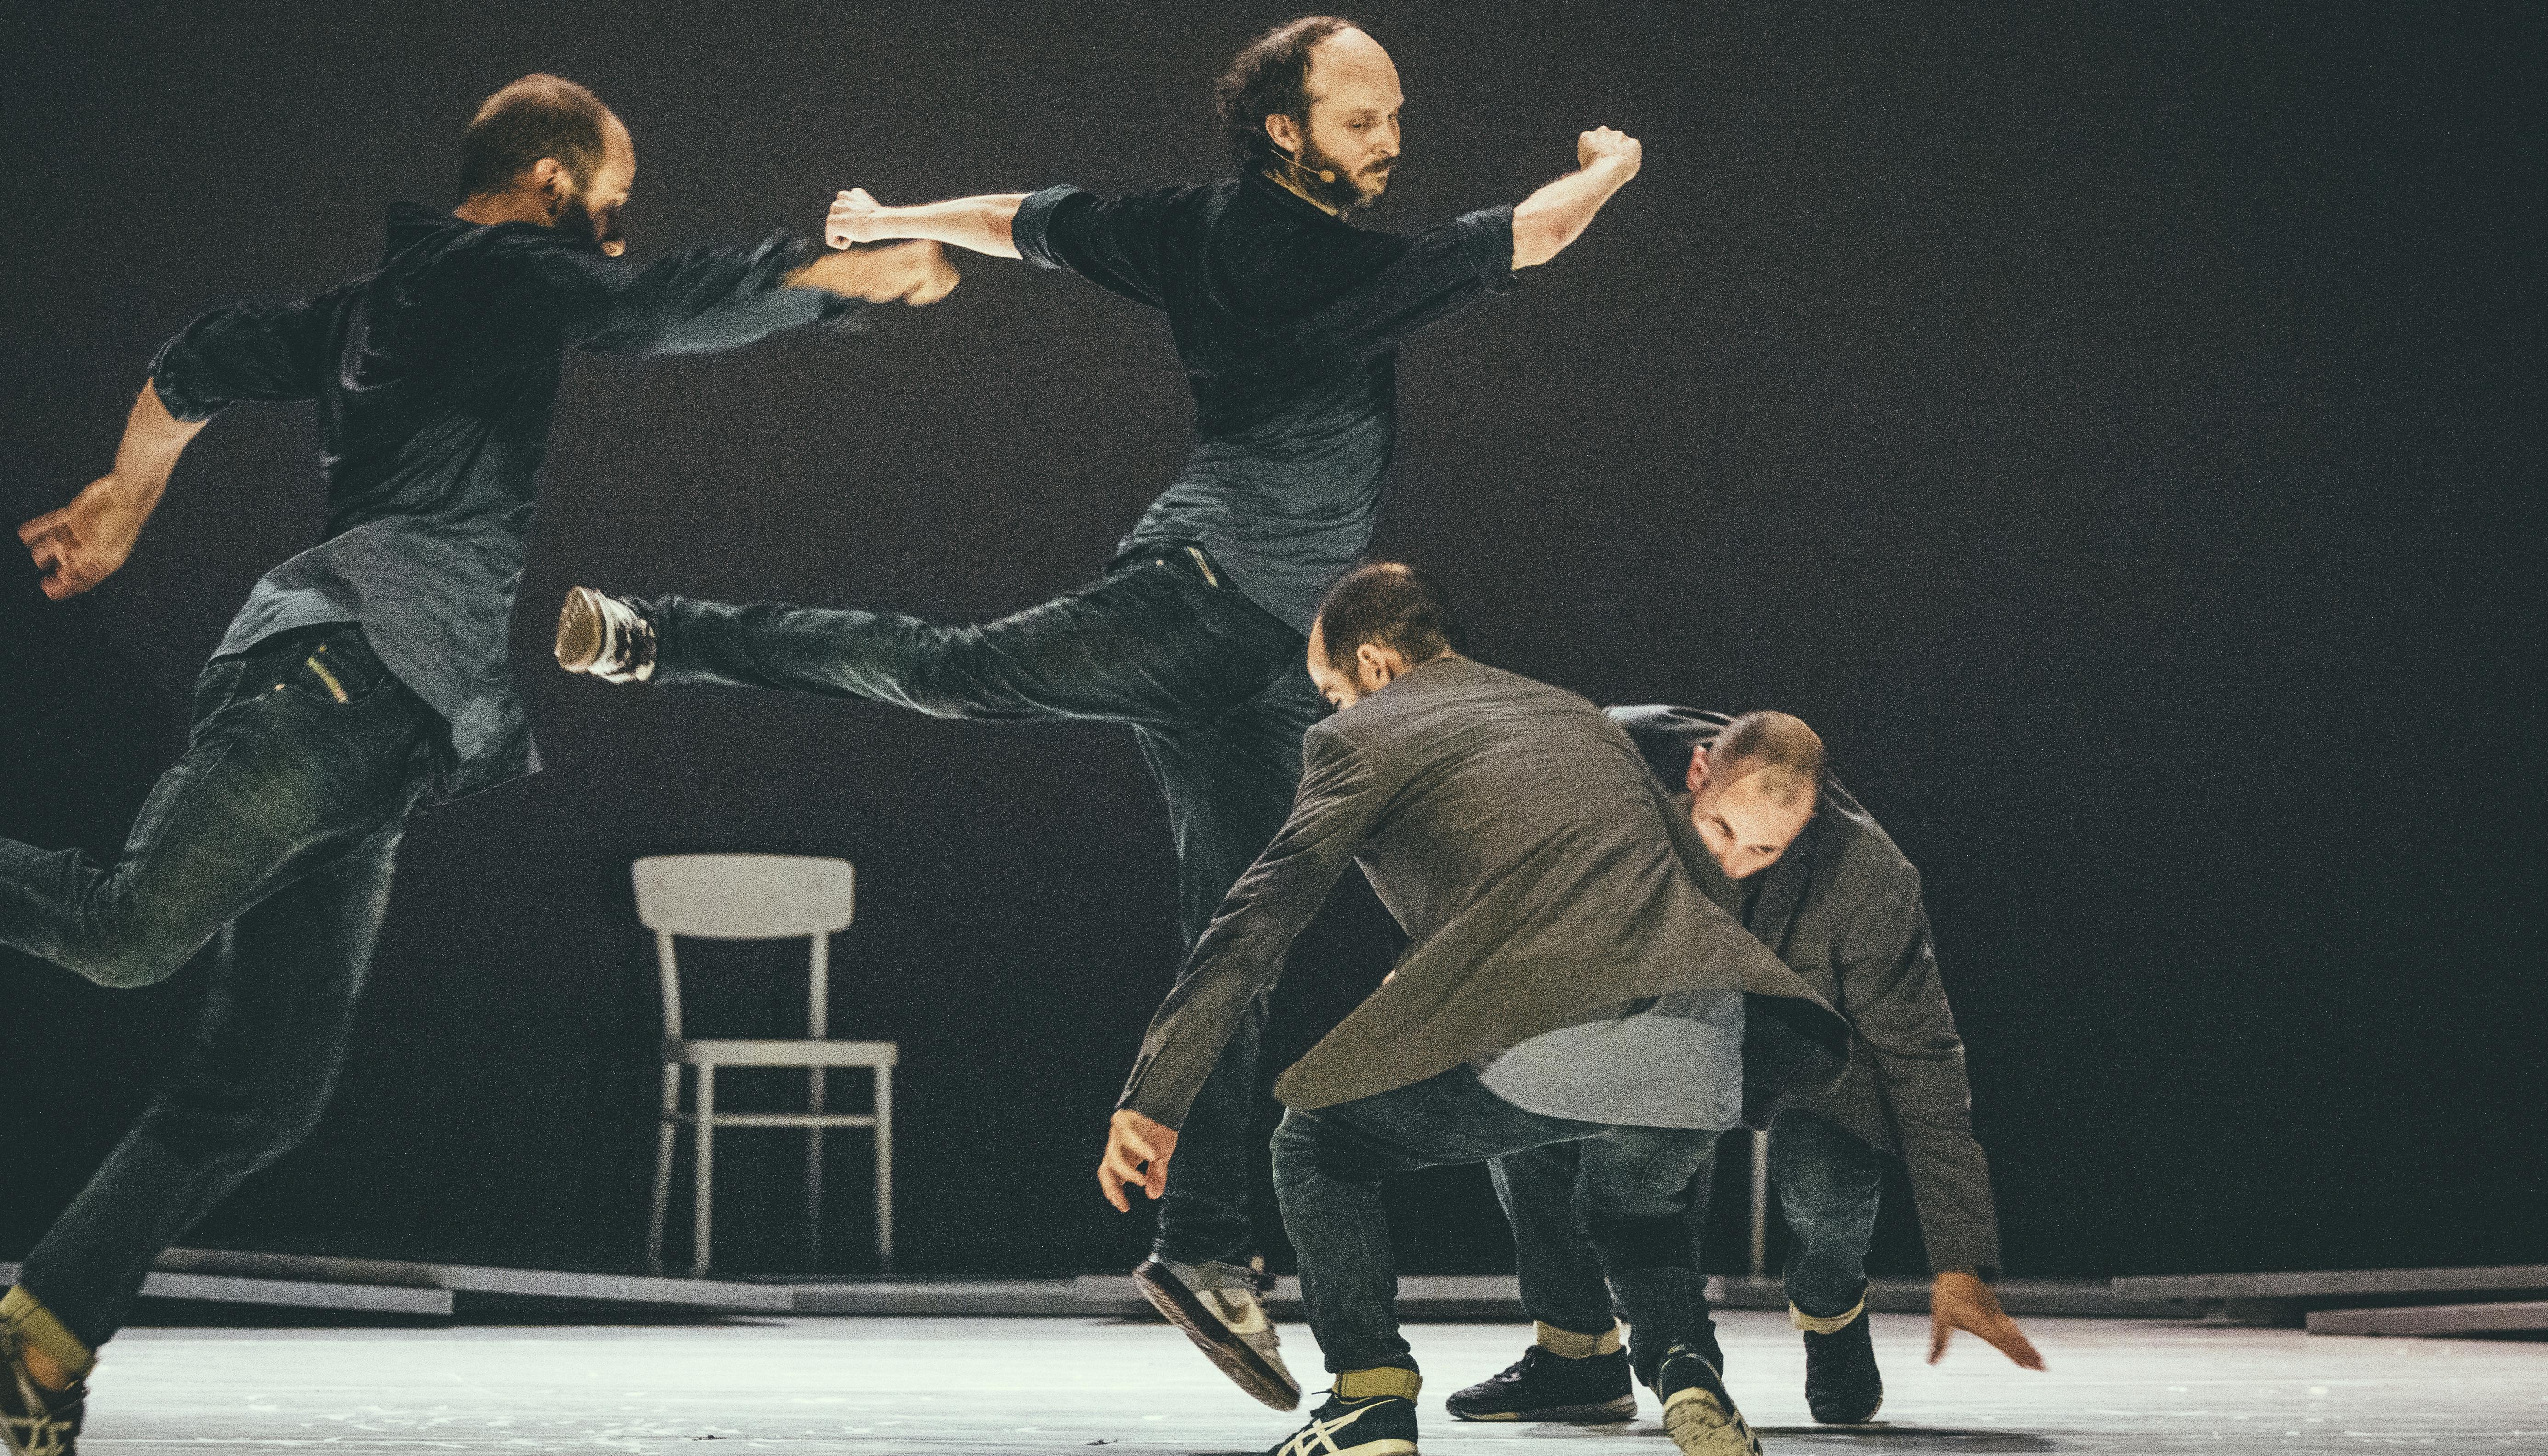 On the left, two dancers are taking a leap, while on the right two are crouching.